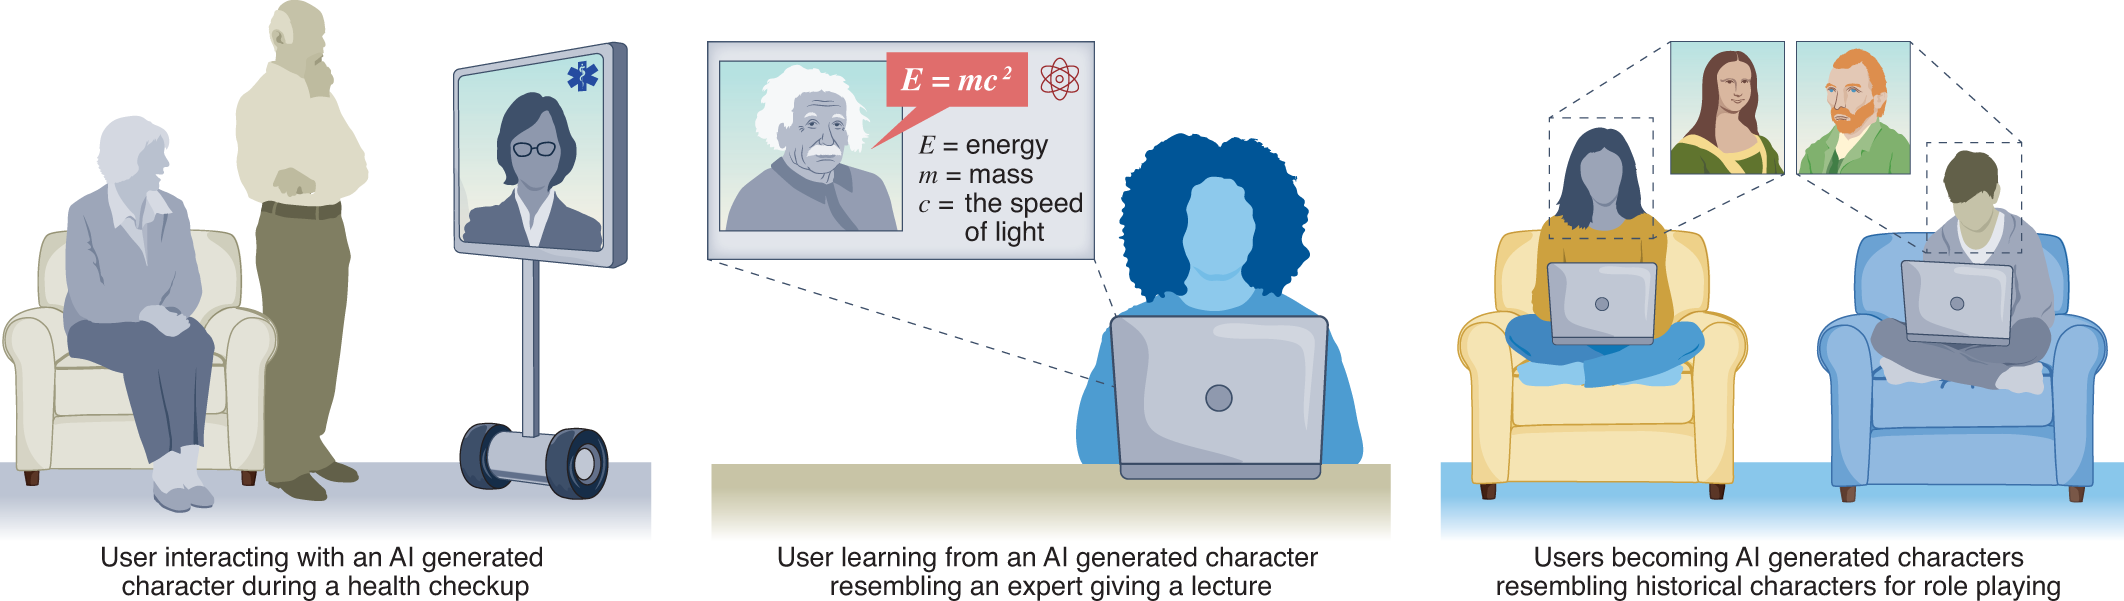 Techar And Student Xxx Vidio Mp4 - AI-generated characters for supporting personalized learning and well-being  | Nature Machine Intelligence